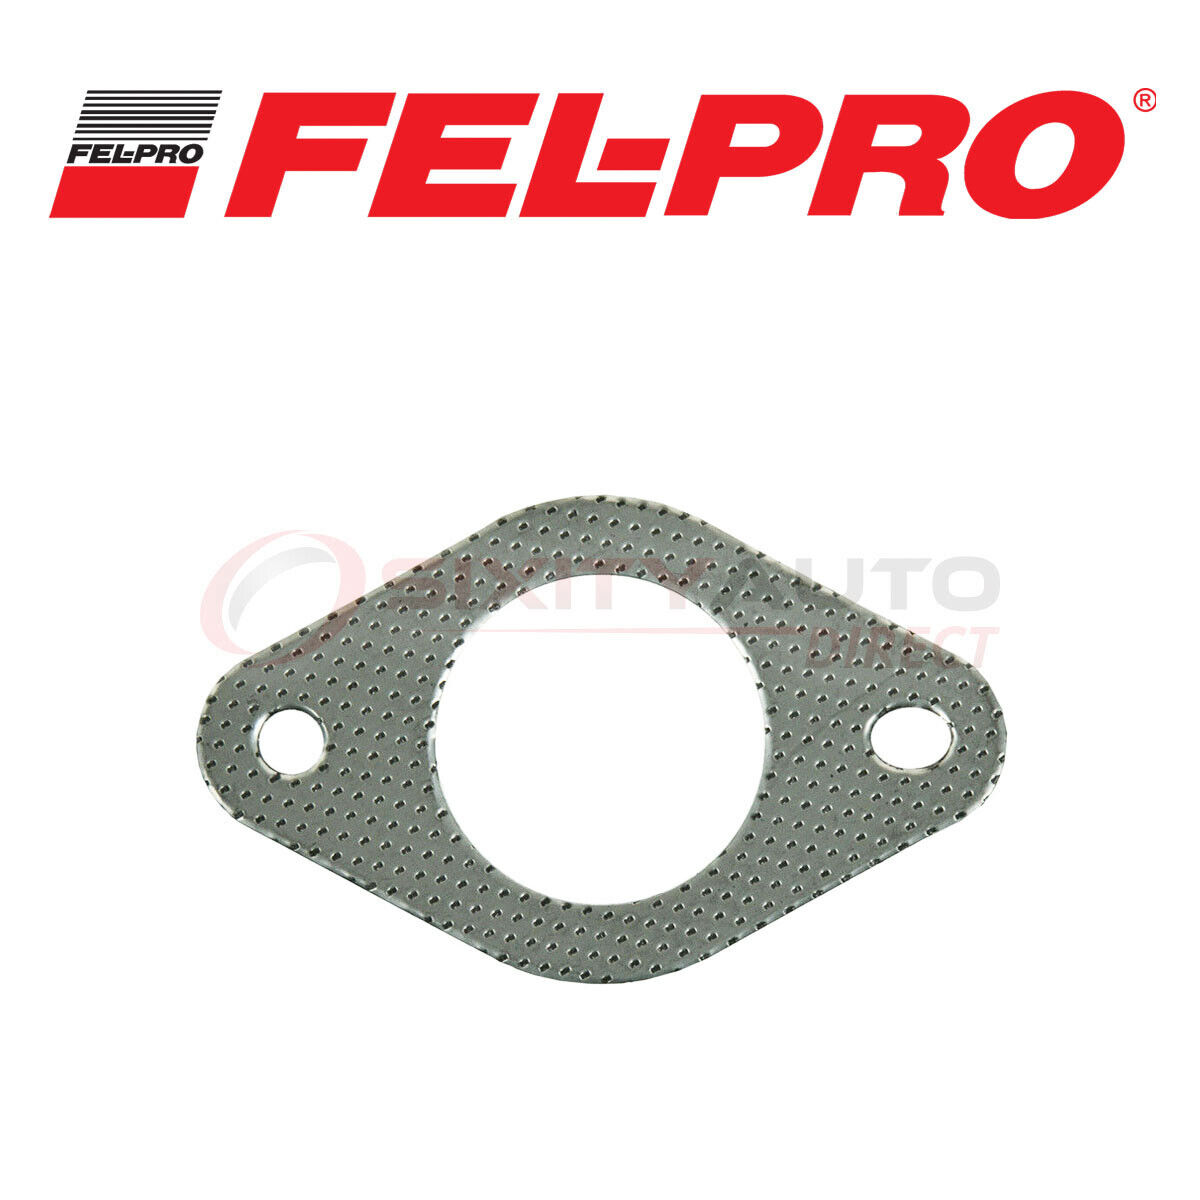 Fel Pro Exhaust Pipe Flange Gasket for 2011 Saab 9-4X 3.0L V6 - Tailpipe gf